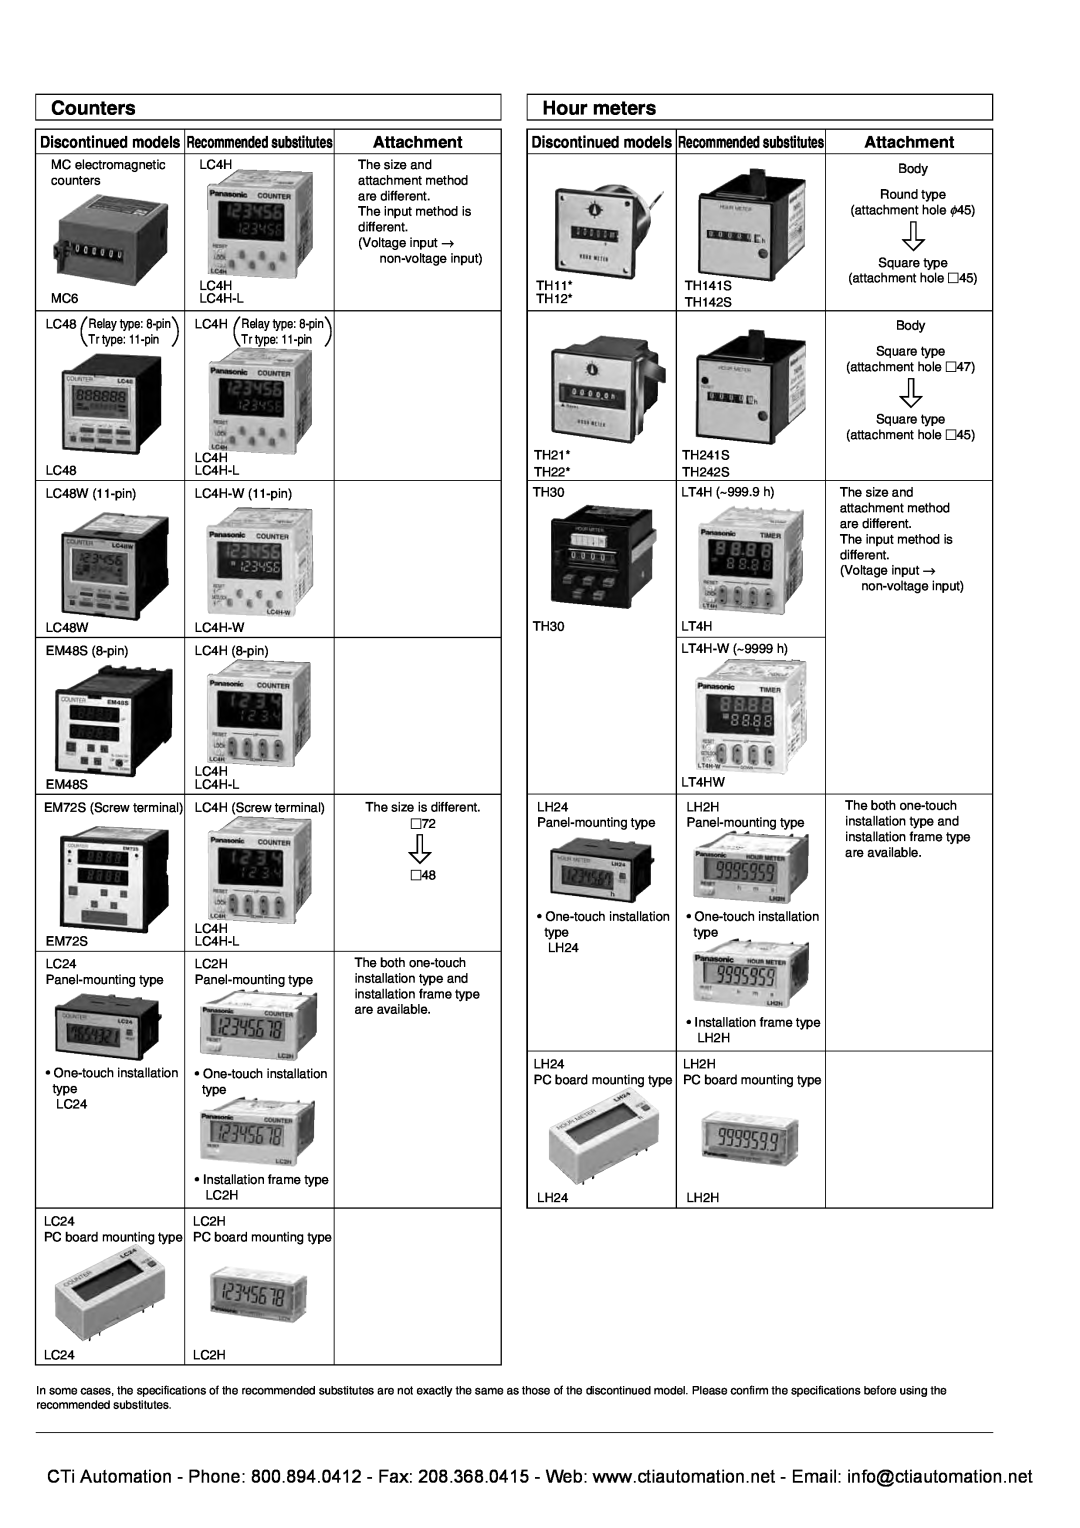 Panasonic LC2H specifications Counters, Hour meters, Attachment, Discontinued models Recommended substitutes 